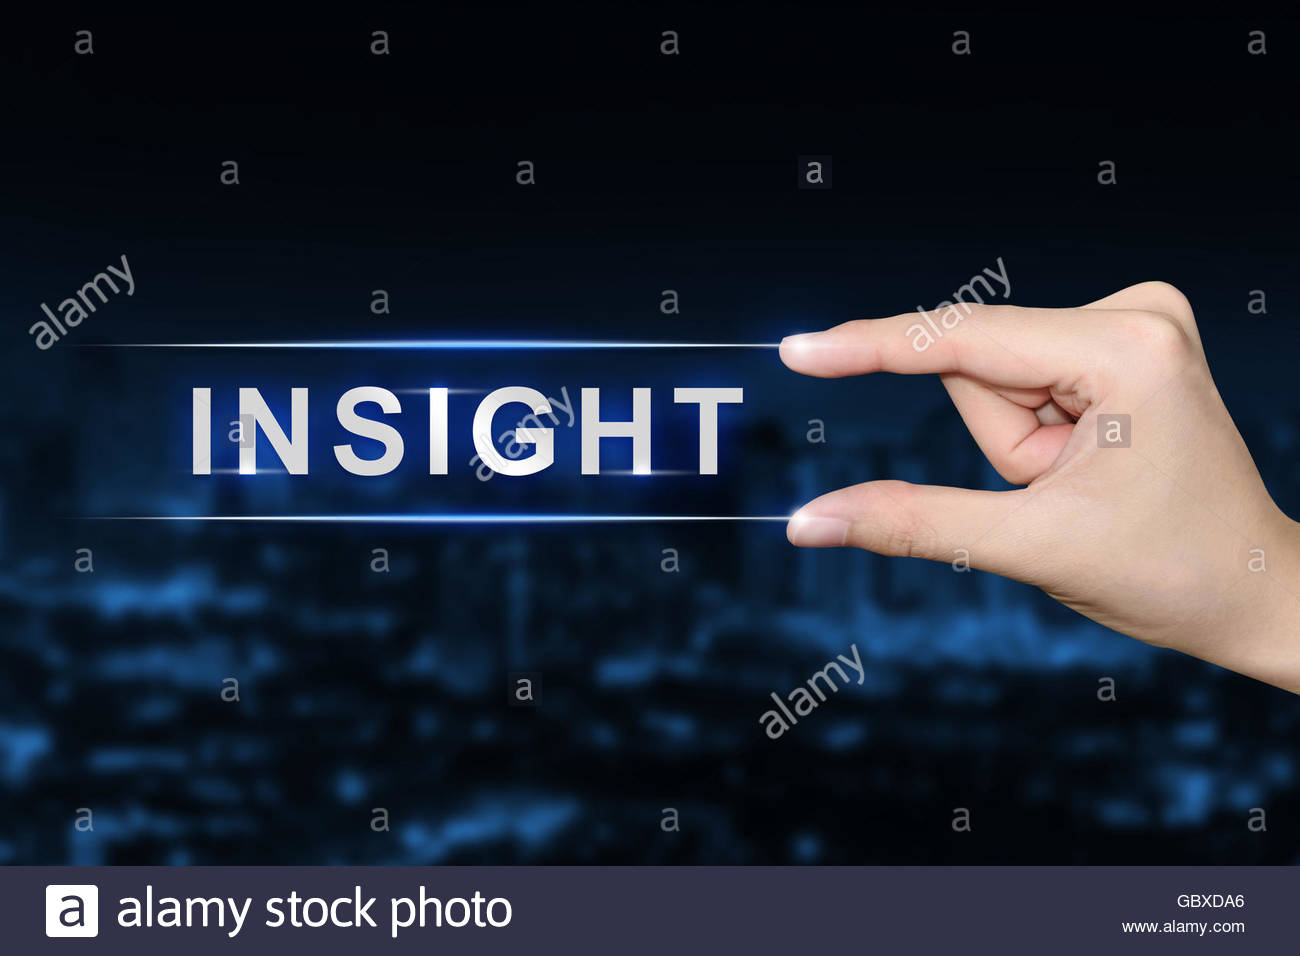 Hand Pushing Insight Button On Blurred Blue Background Stock Photo